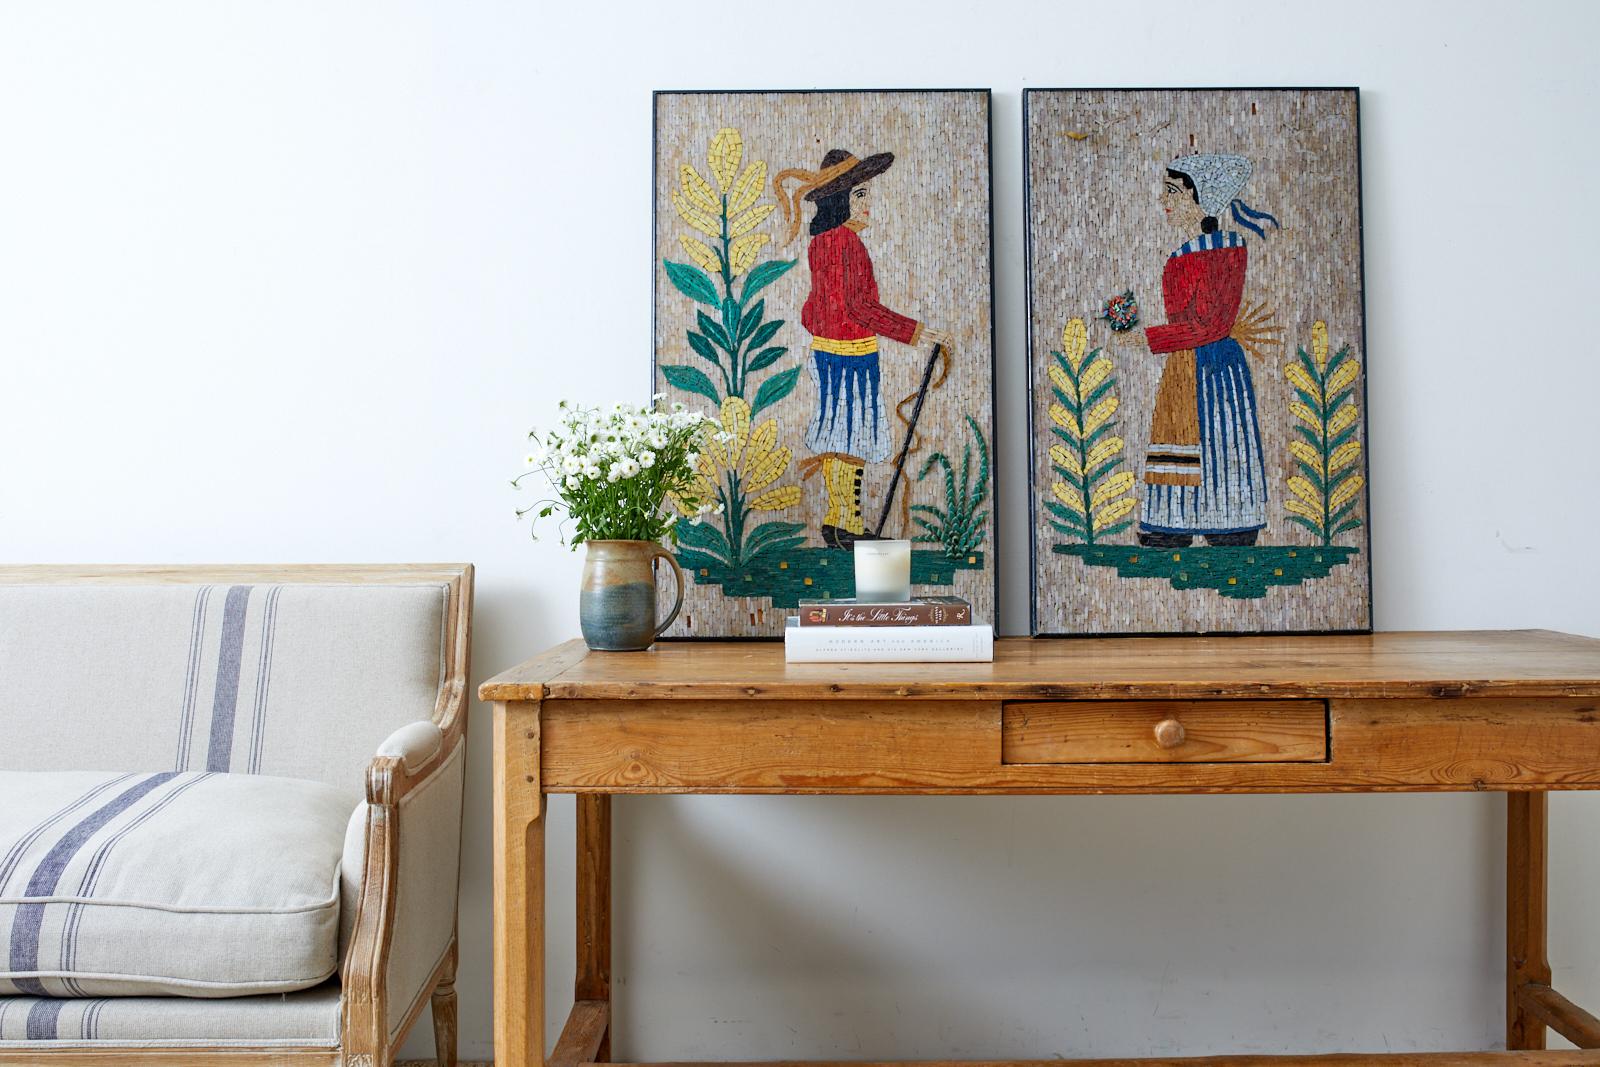 Charming pair of framed folk artworks or paintings made of mosaic tiles. Depicts a colonial-style man and woman among blooming vegetation. Beautifully crafted with vibrant colored tiles. Set in ebonized wood frames with minor losses as seen in